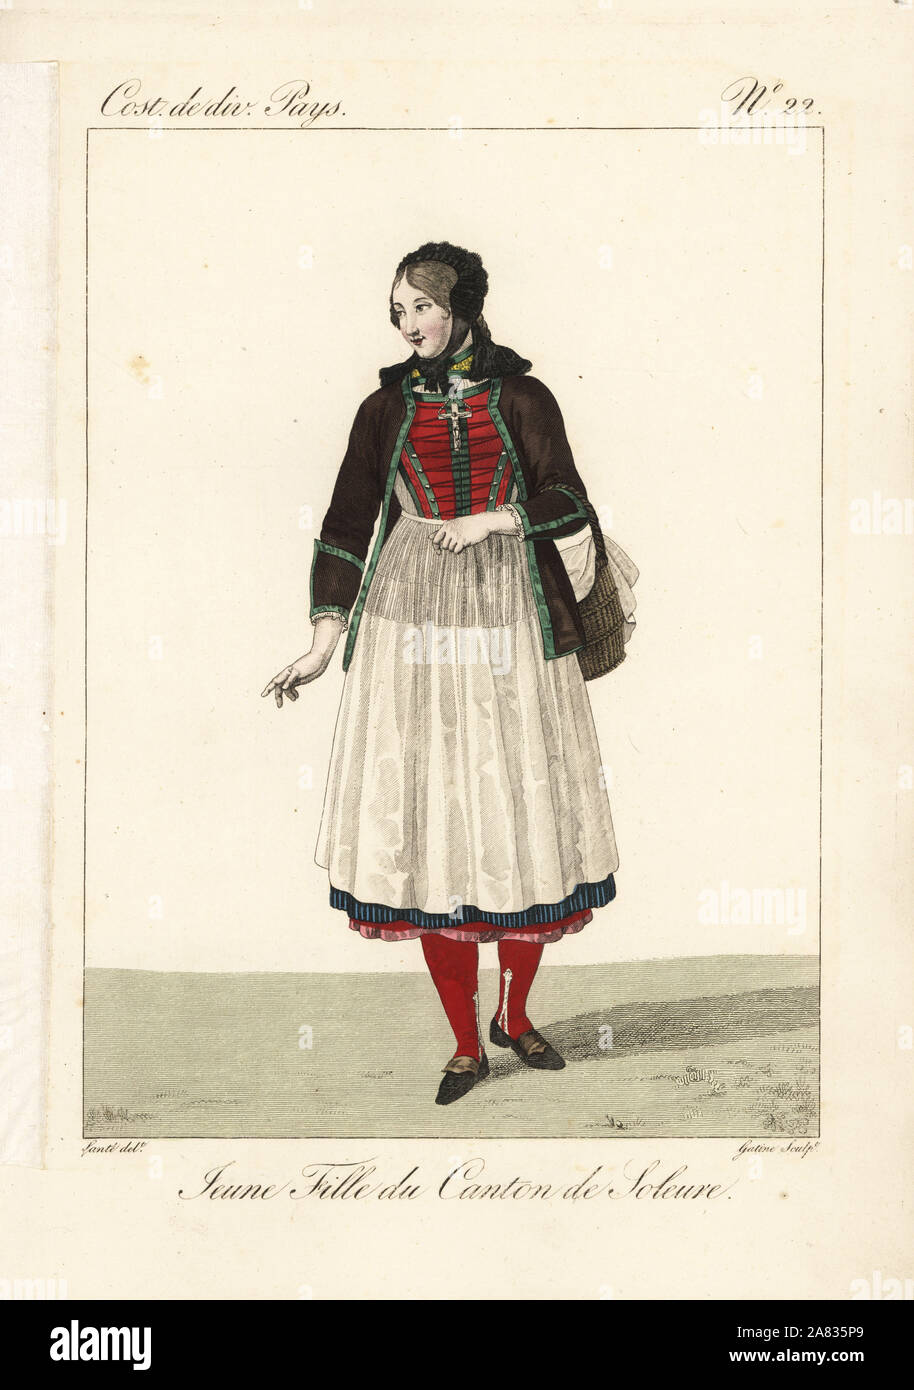 Girl of the Canton of Solothurn, Switzerland, 19th century. She has removed her straw hat to reveal the black velvet toquet. She wears a jacket over laced bodice, apron and many petticoats. Handcoloured copperplate engraving by Georges Jacques Gatine after an illustration by Louis Marie Lante from Costumes of Various Countries, Costumes de Divers Pays, Paris, 1827. Stock Photo